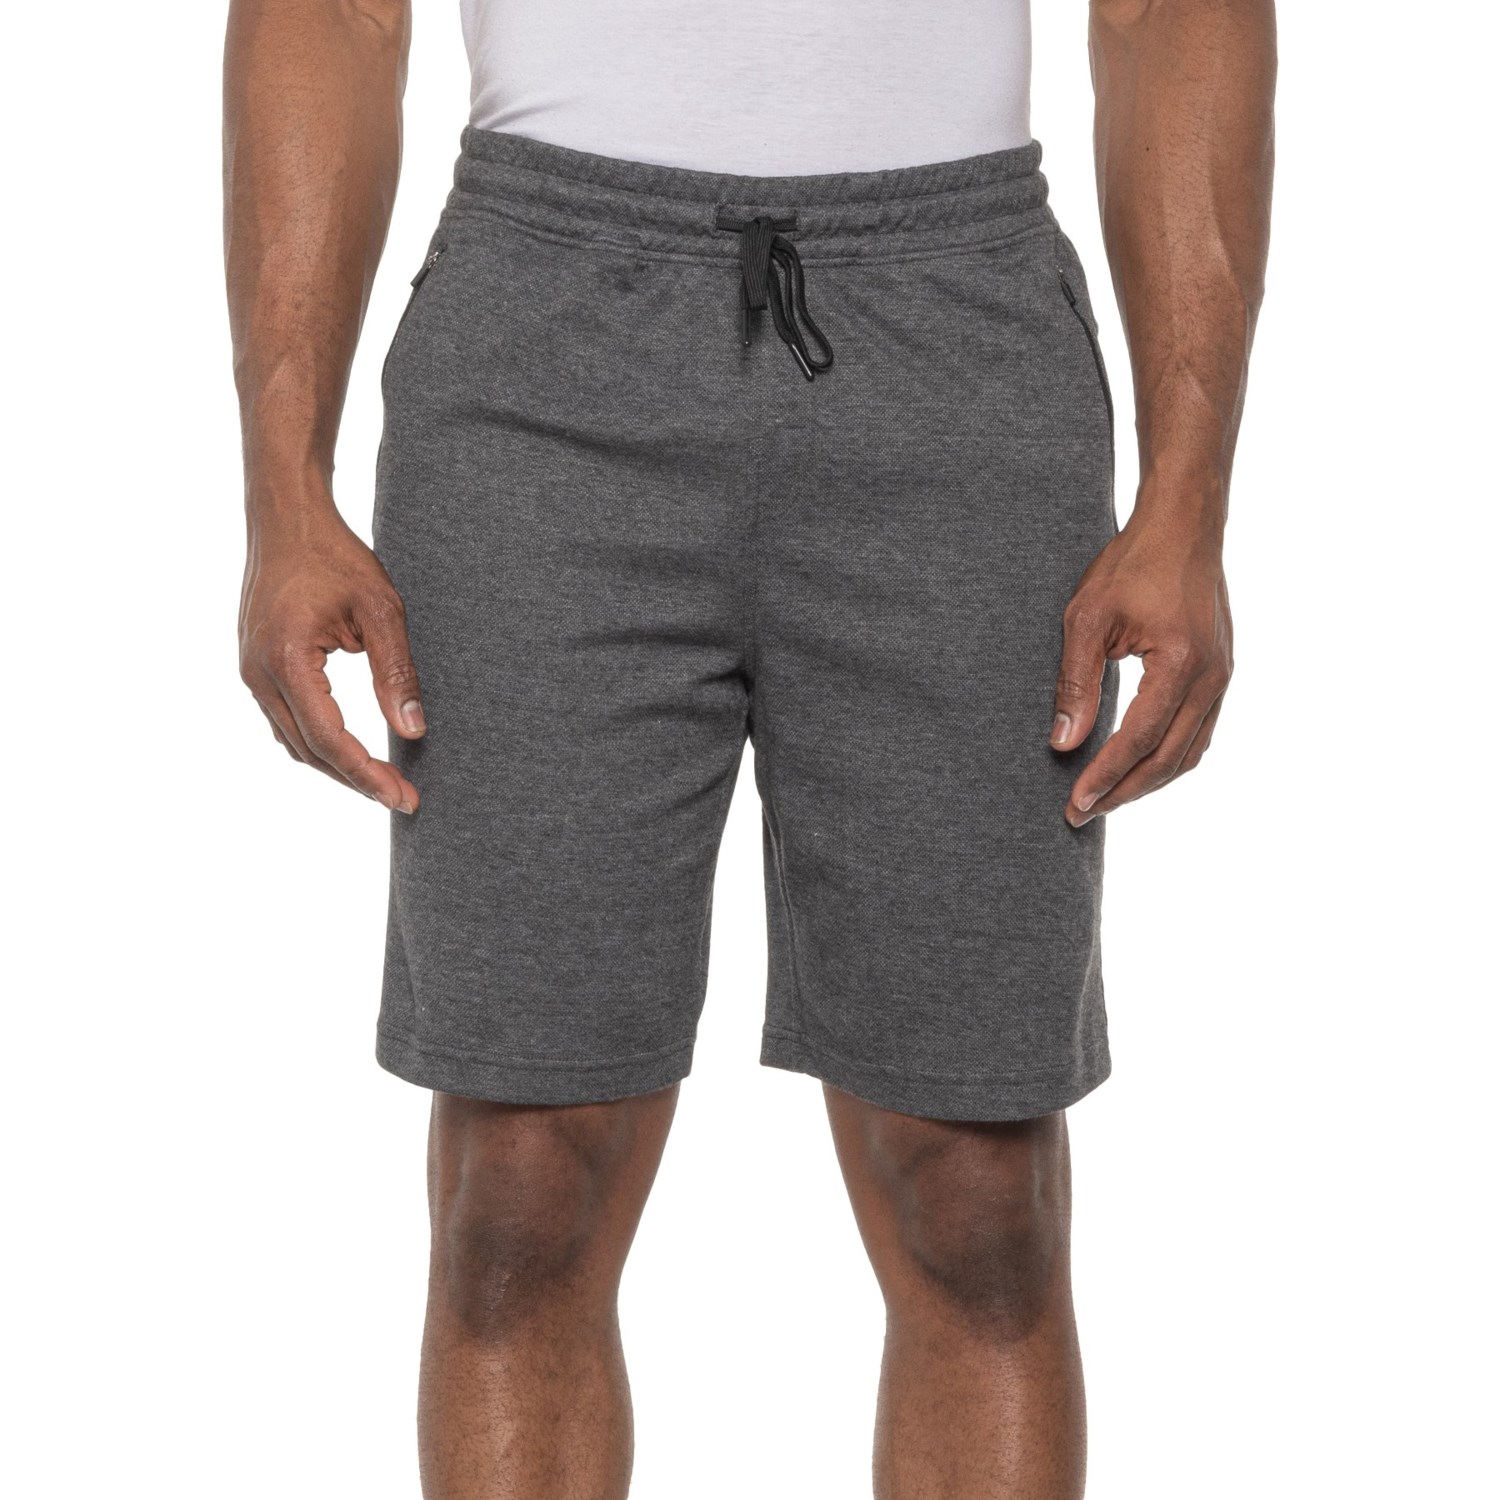 90 DEGREES BY REFLEX Side Zip Pocket Shorts (For Men) - Save 48%